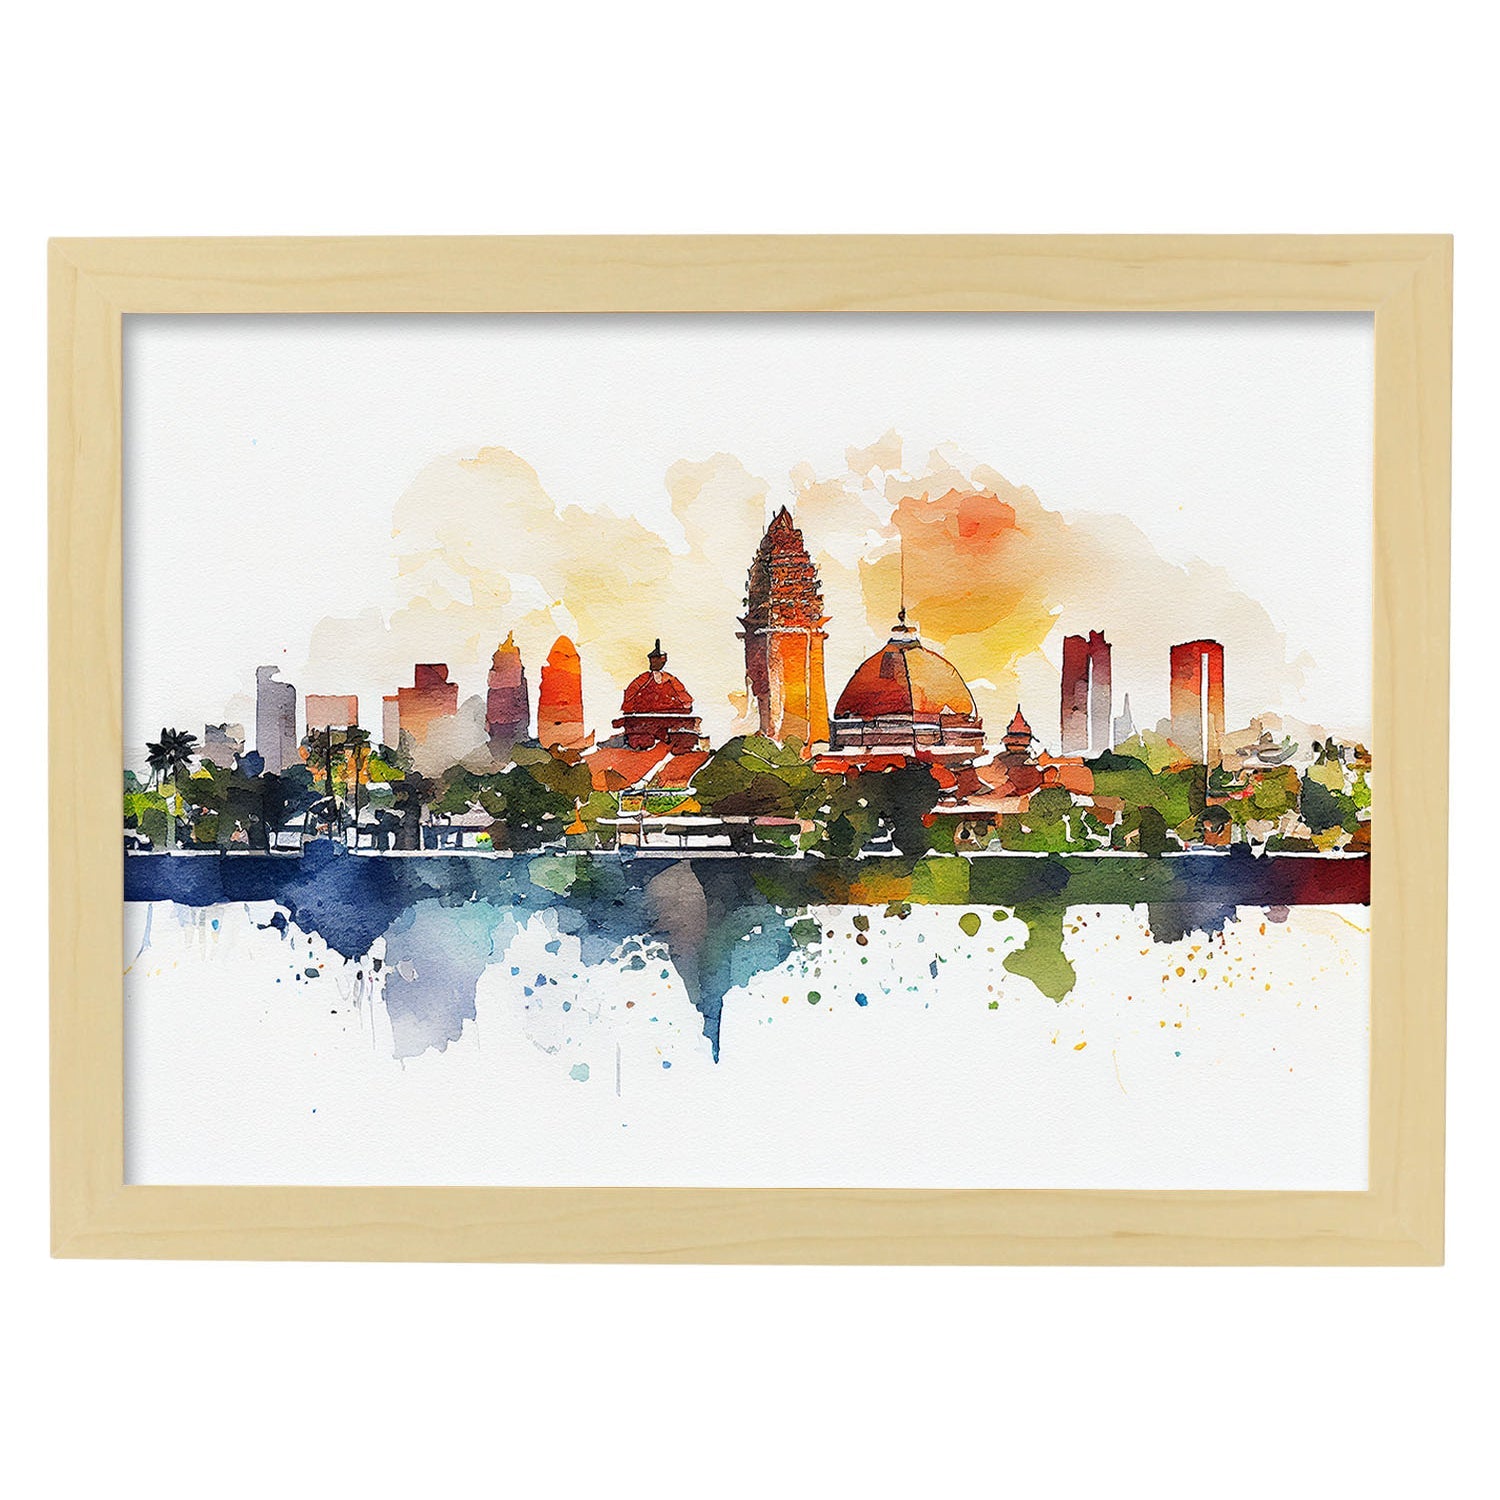 Nacnic watercolor of a skyline of the city of Bali_2. Aesthetic Wall Art Prints for Bedroom or Living Room Design.-Artwork-Nacnic-A4-Marco Madera Clara-Nacnic Estudio SL